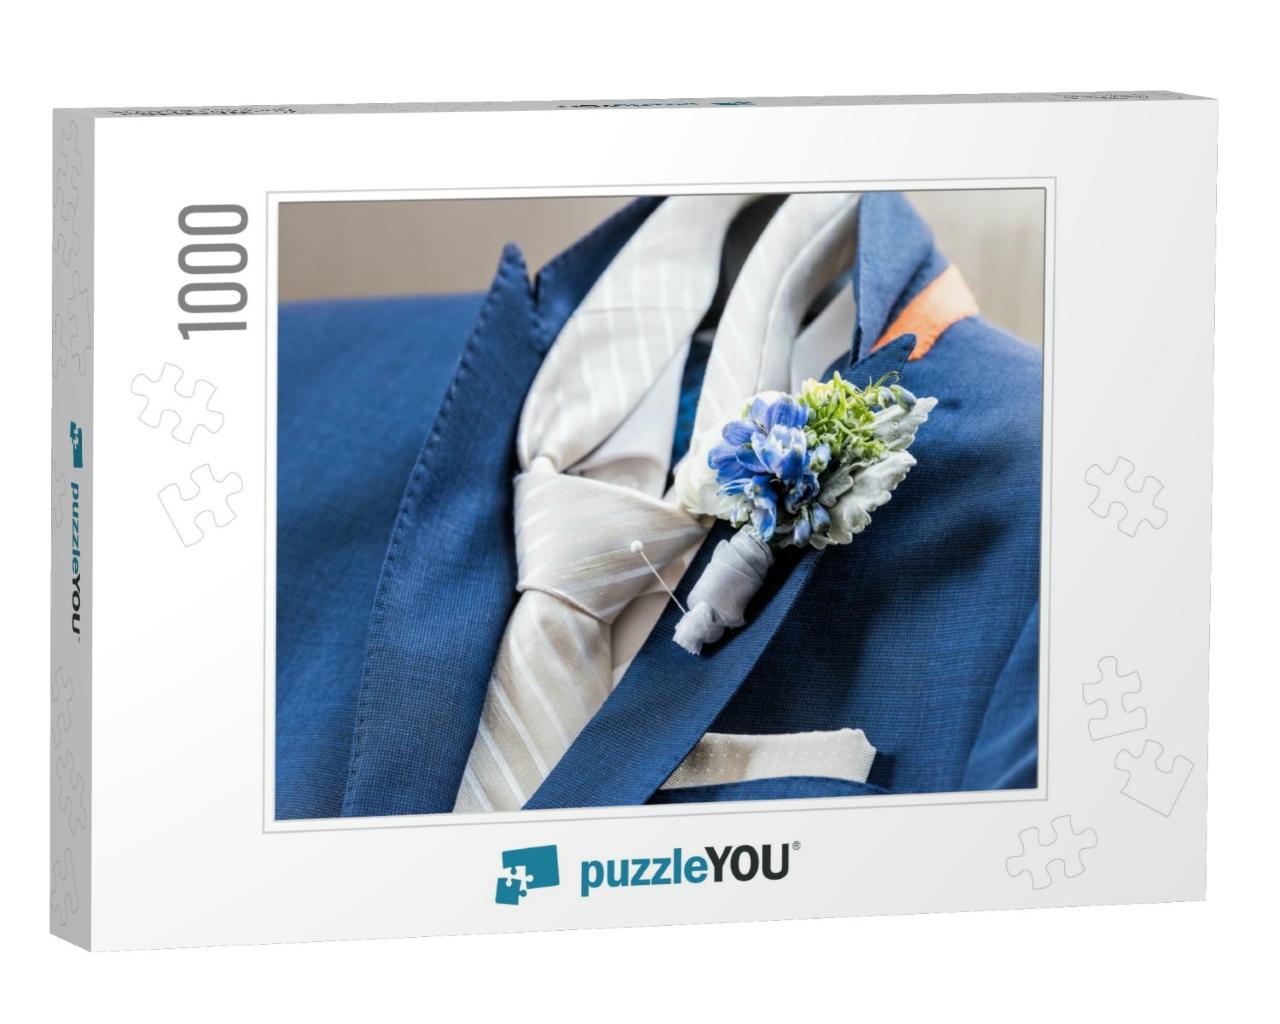 Mens New Marine Navy Blue Suit & Tie Groom Clos... Jigsaw Puzzle with 1000 pieces